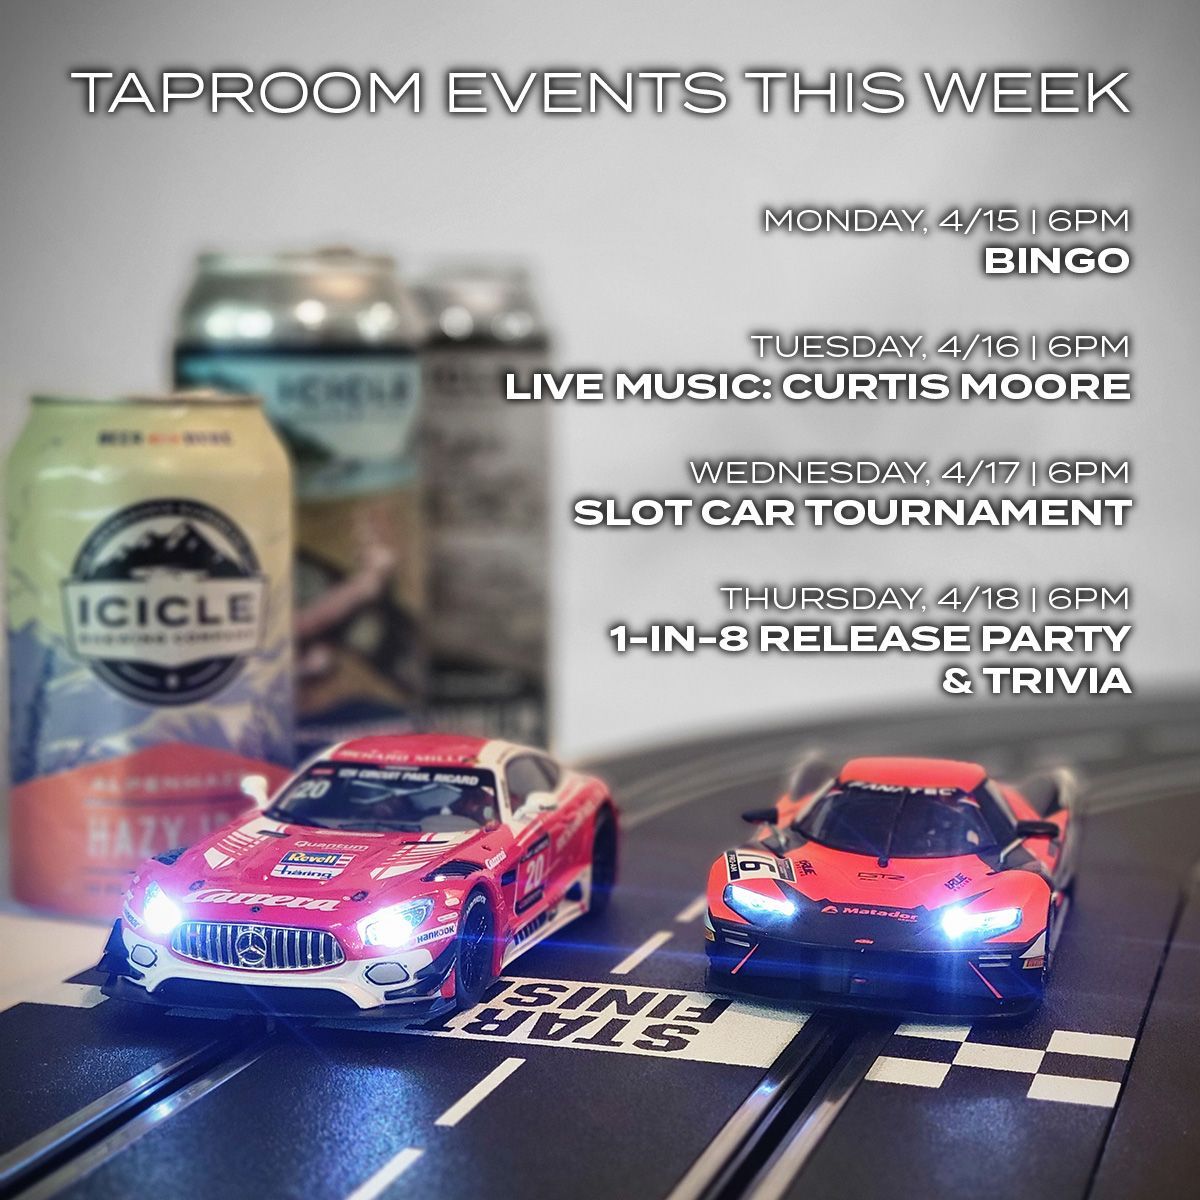 Taproom events this week! Bingo tonight, Live tunes from Curtis Moore Tuesday, Slot Car Tournament on Wednesday, and our One In Eight beer release party & trivia on Thursday!